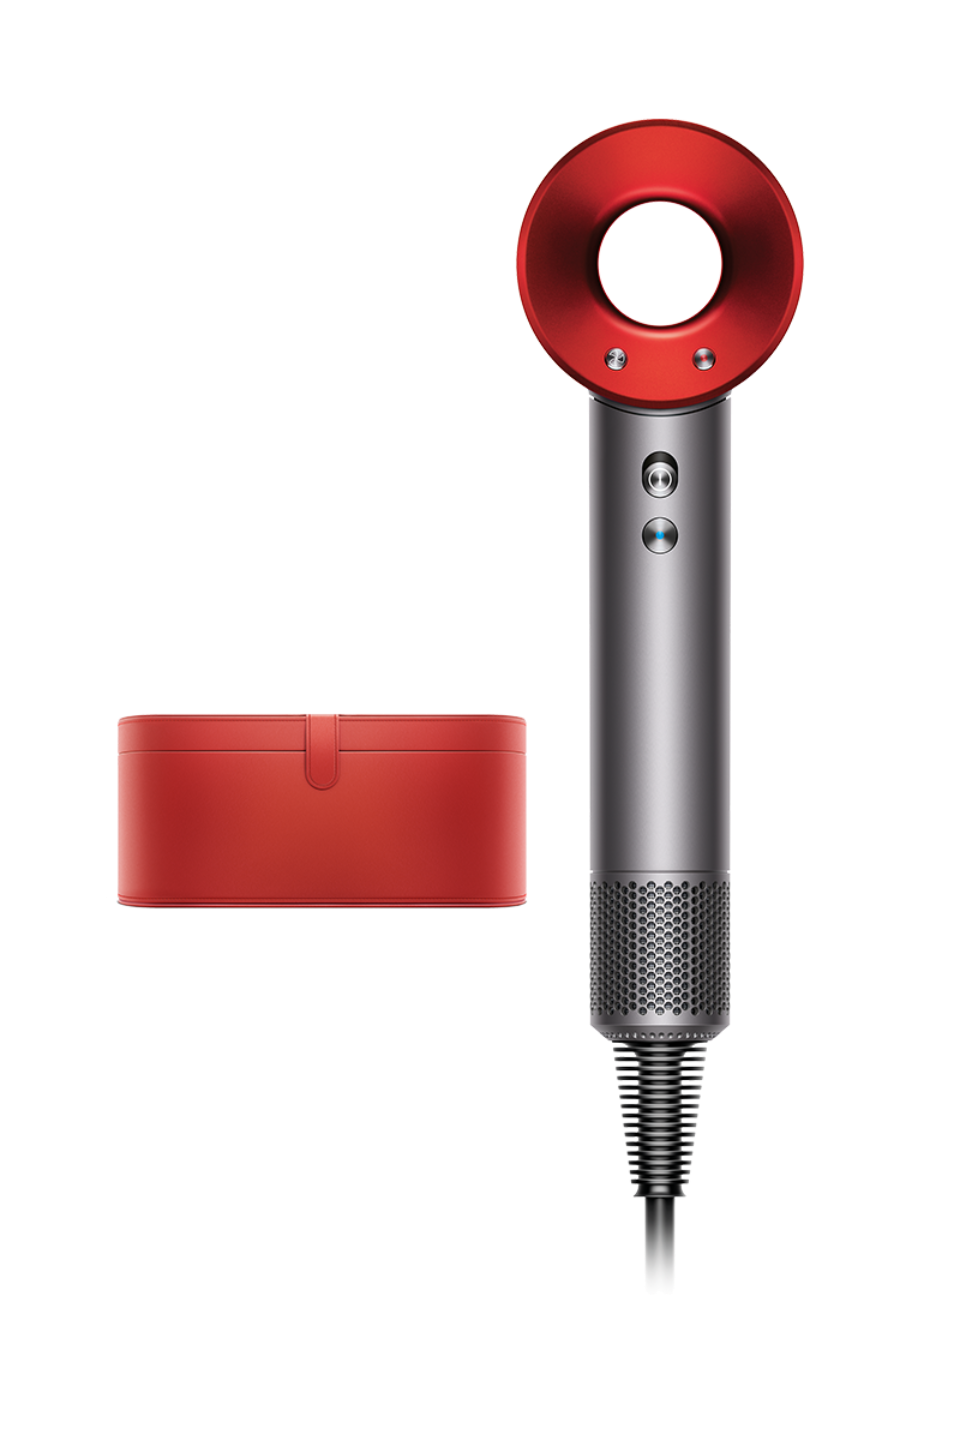 Dyson Supersonic™ hair dryer (Iron/Red)